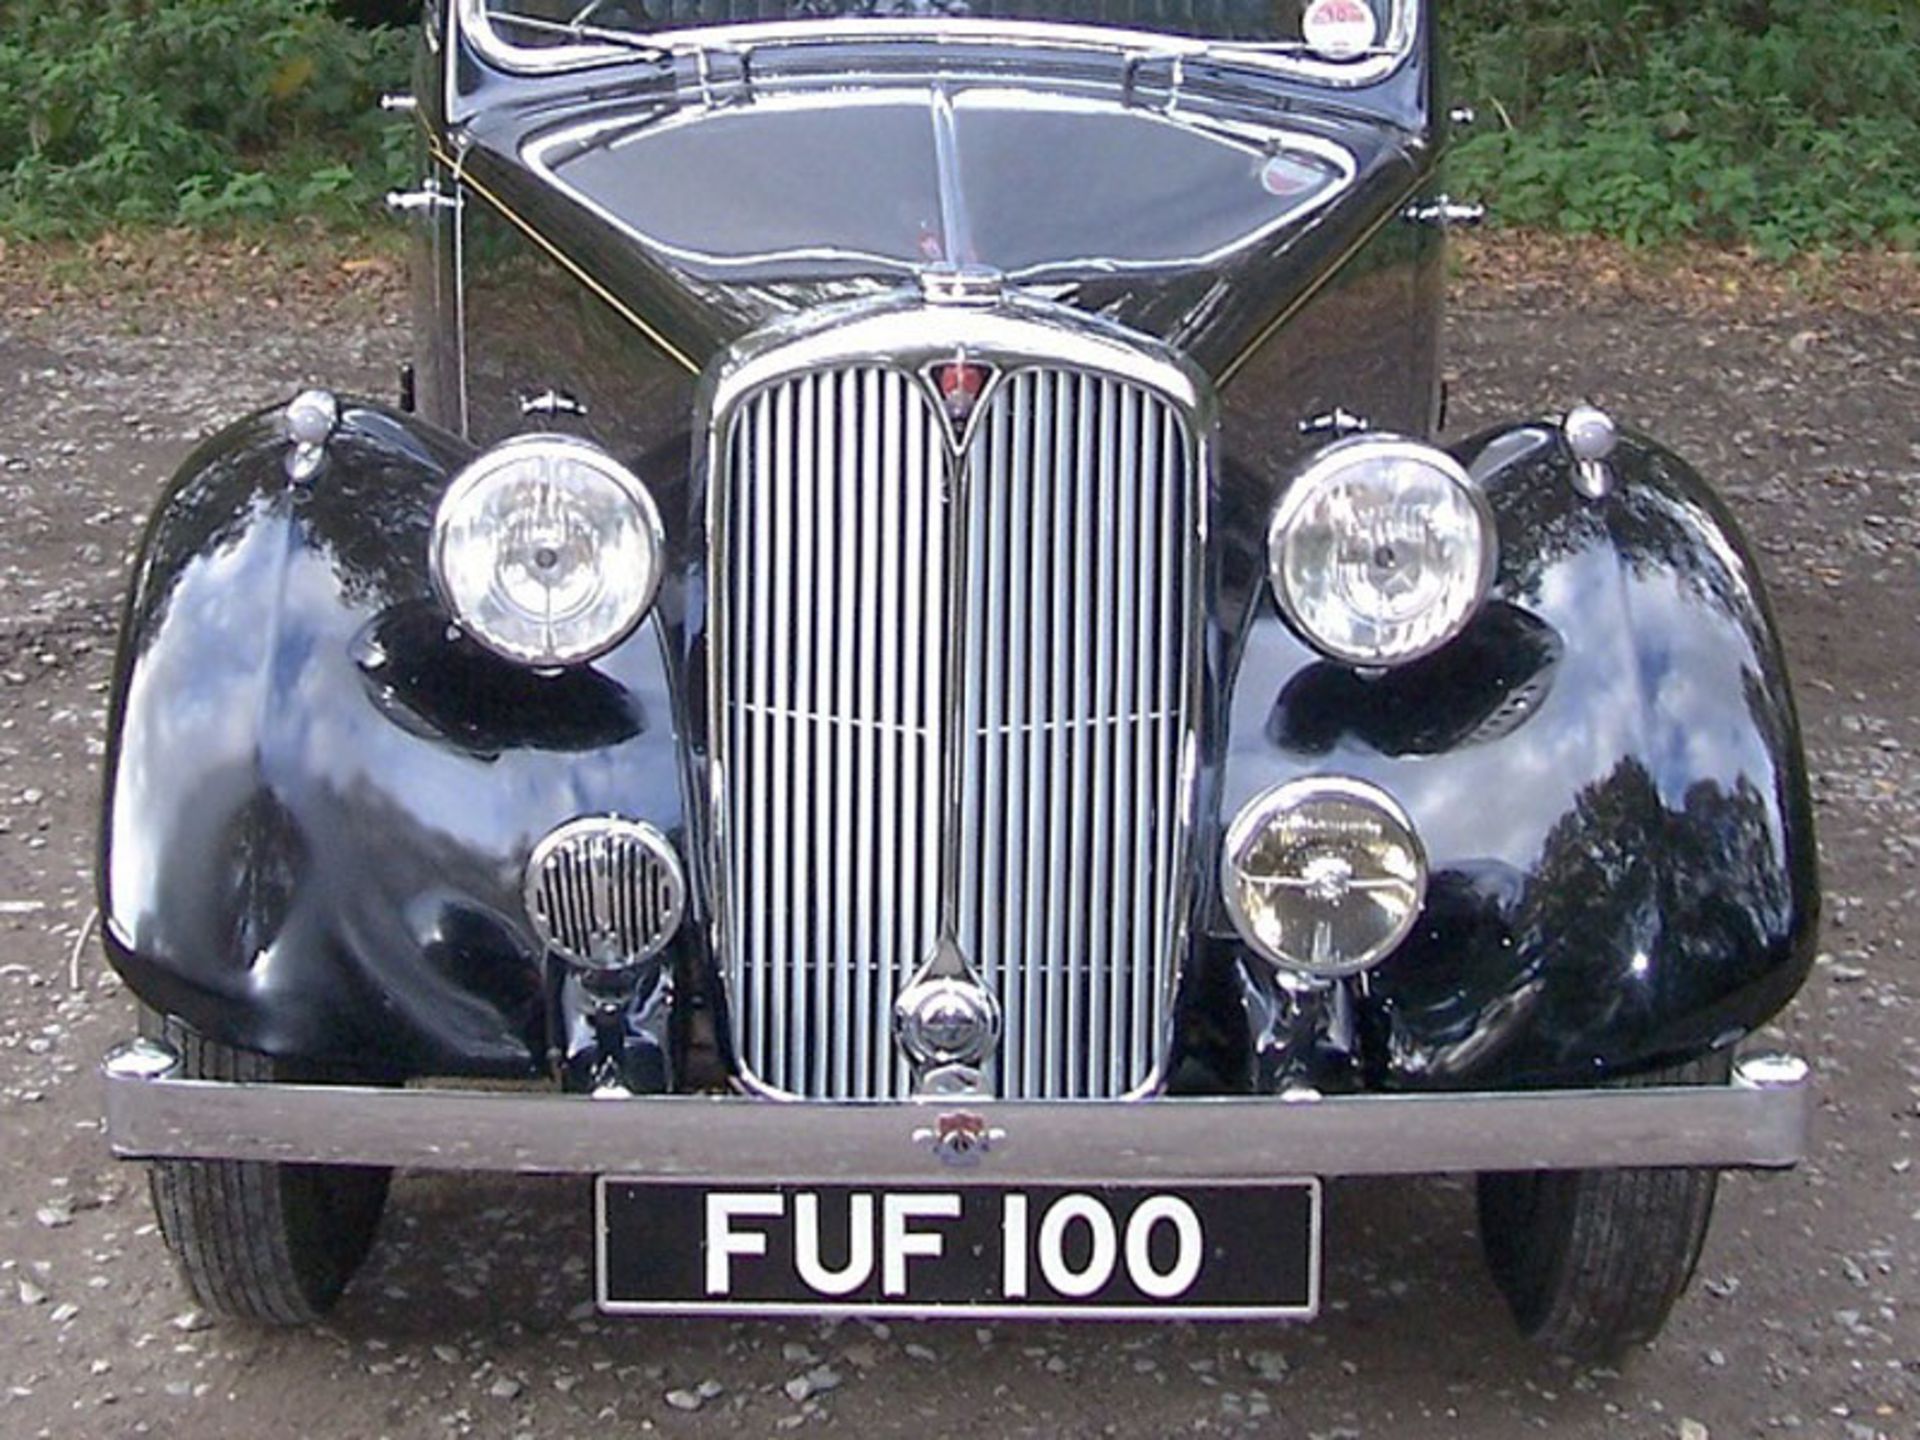 1939 Rover 12hp Saloon - Image 3 of 6